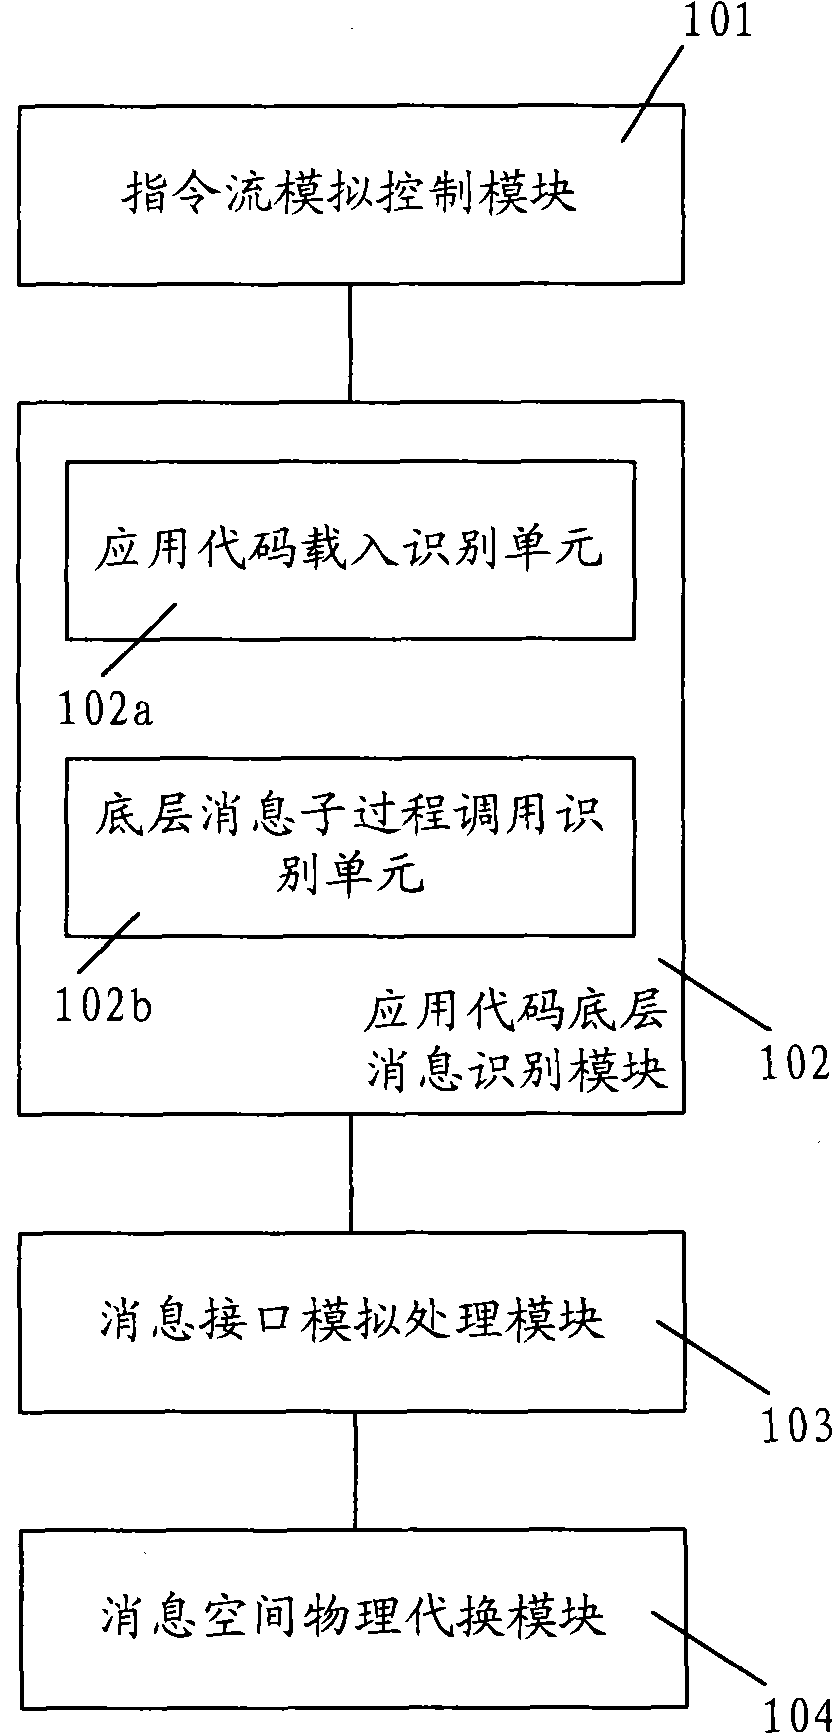 Method and device for simulating bottom-layer message interface